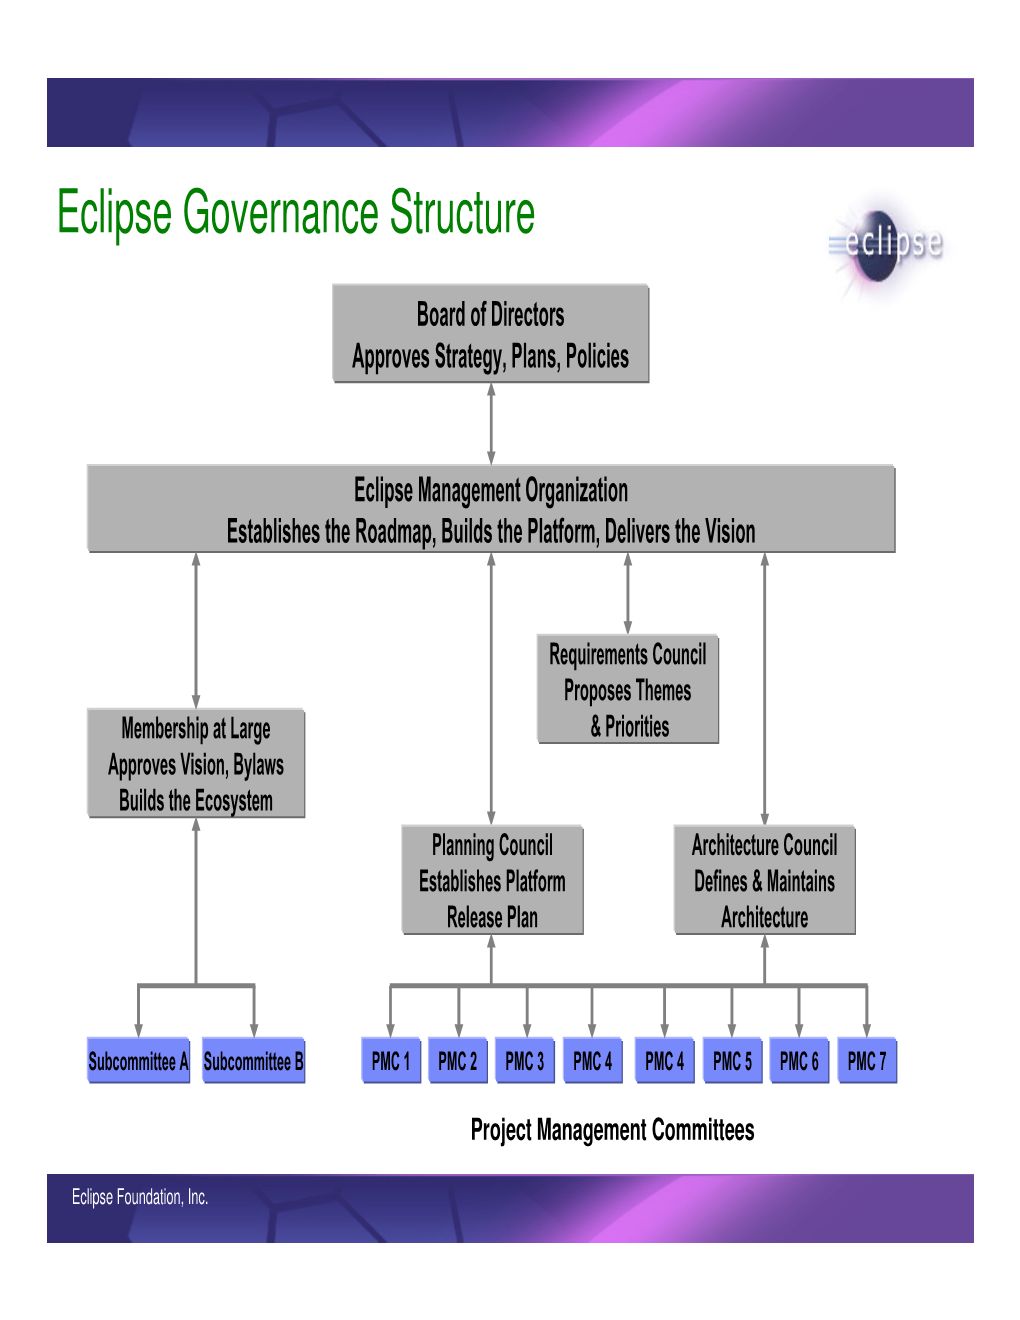 Eclipse Governance Structure